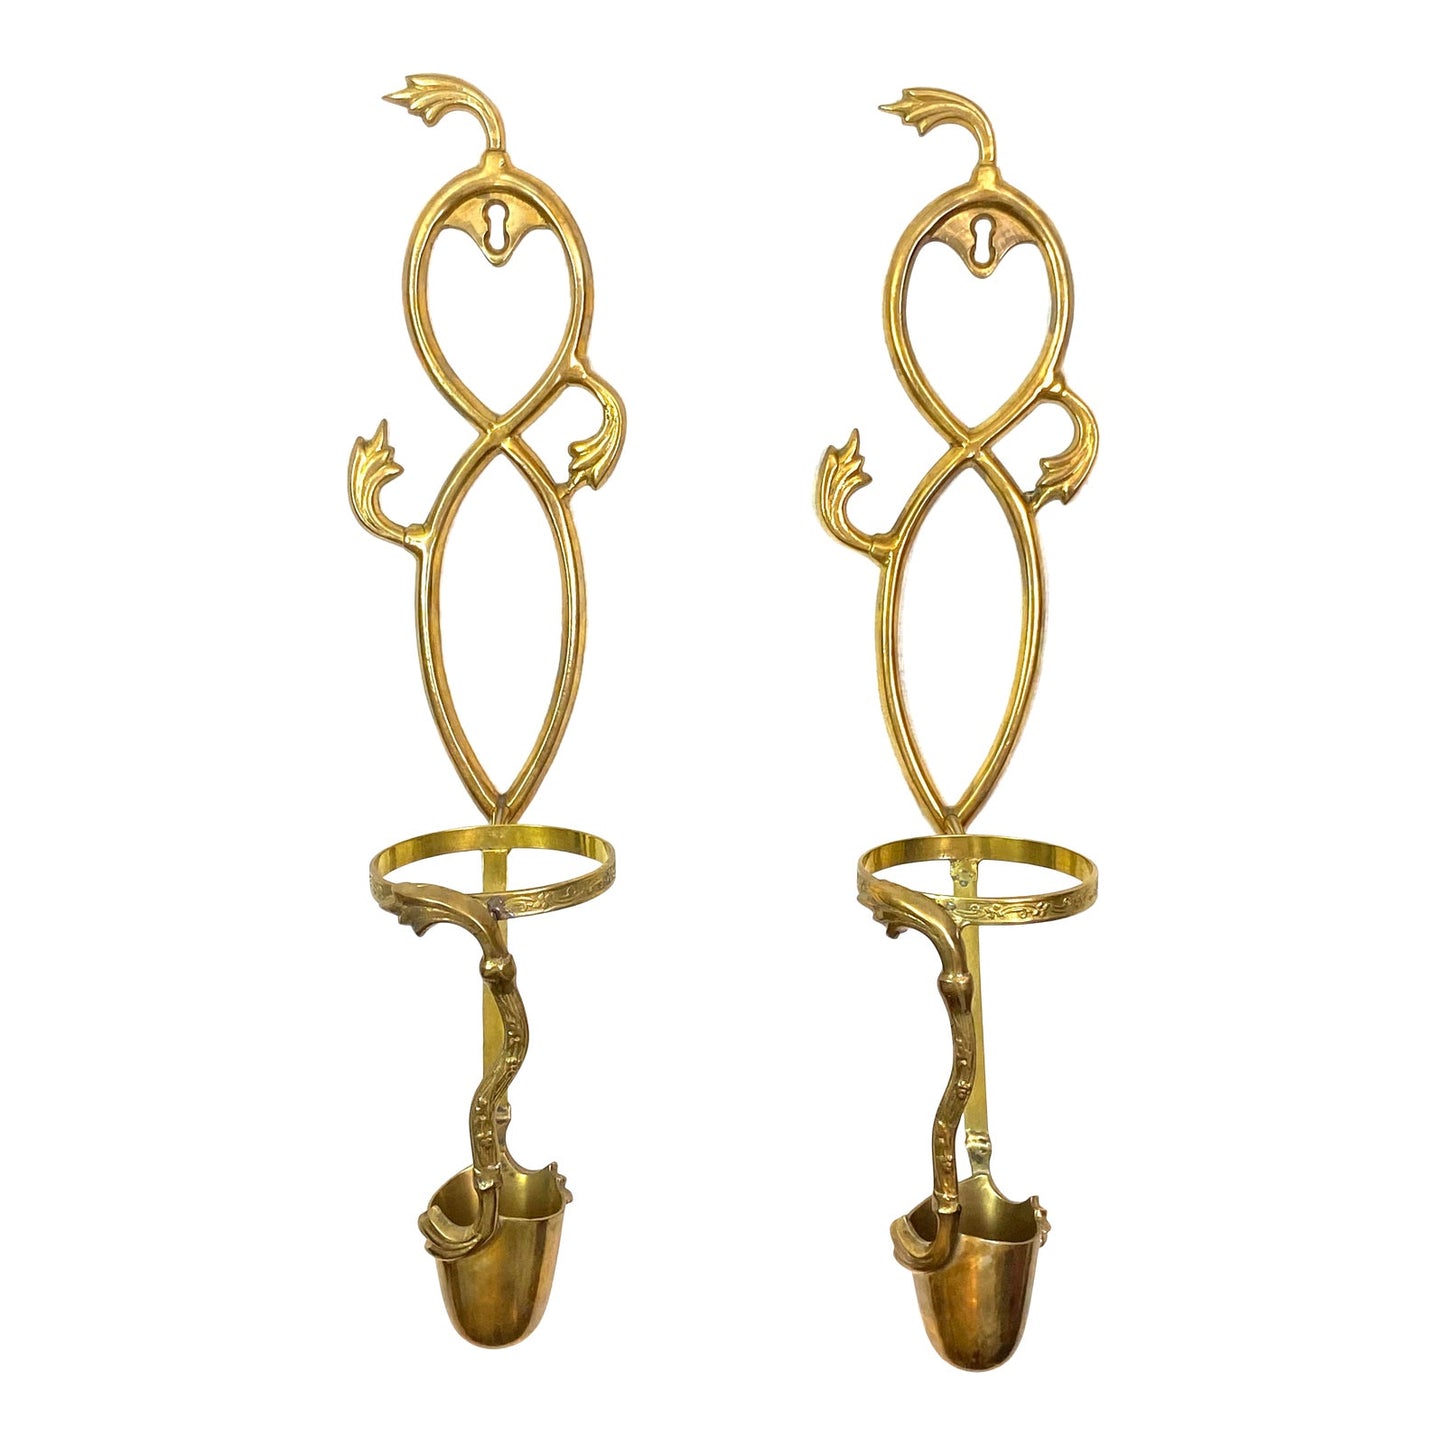 Ornate Brass Wall Sconces Candle Holders